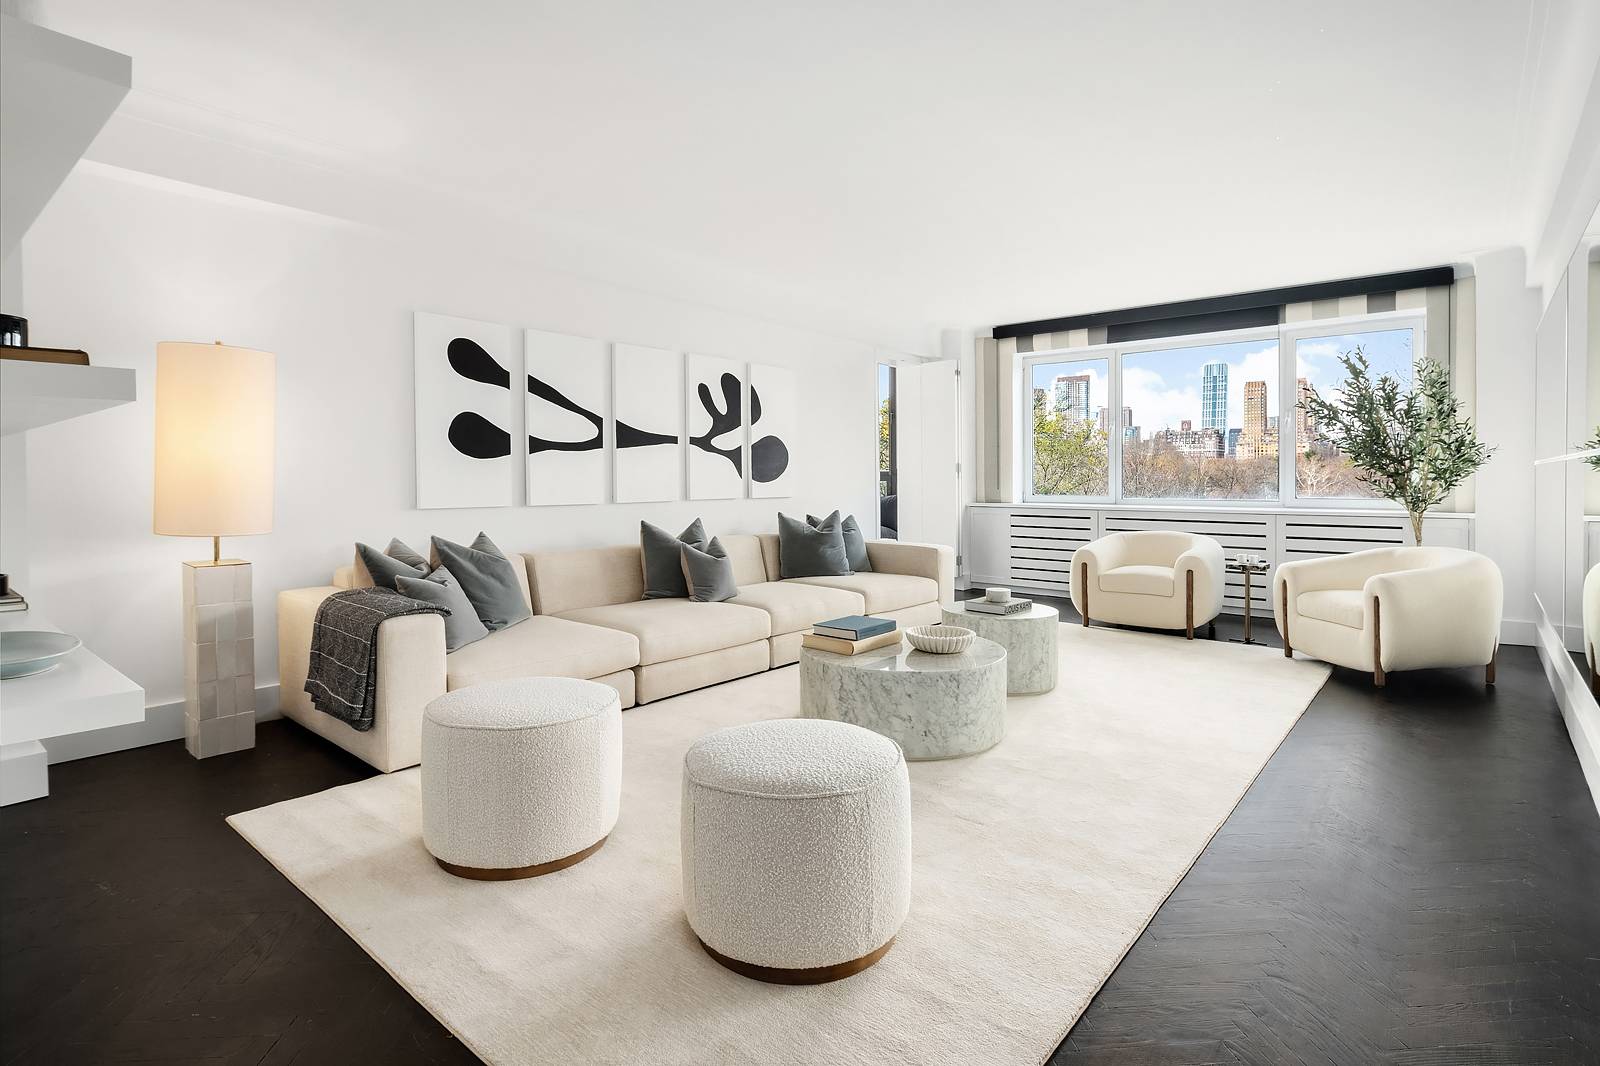 JUST STAGED amp ; BACK ON MARKET RARE OPPORTUNITY TO OWN A CONDO ON 5TH AVENUE This stunning corner residence on Fifth Avenue with full Central Park views presents an ...